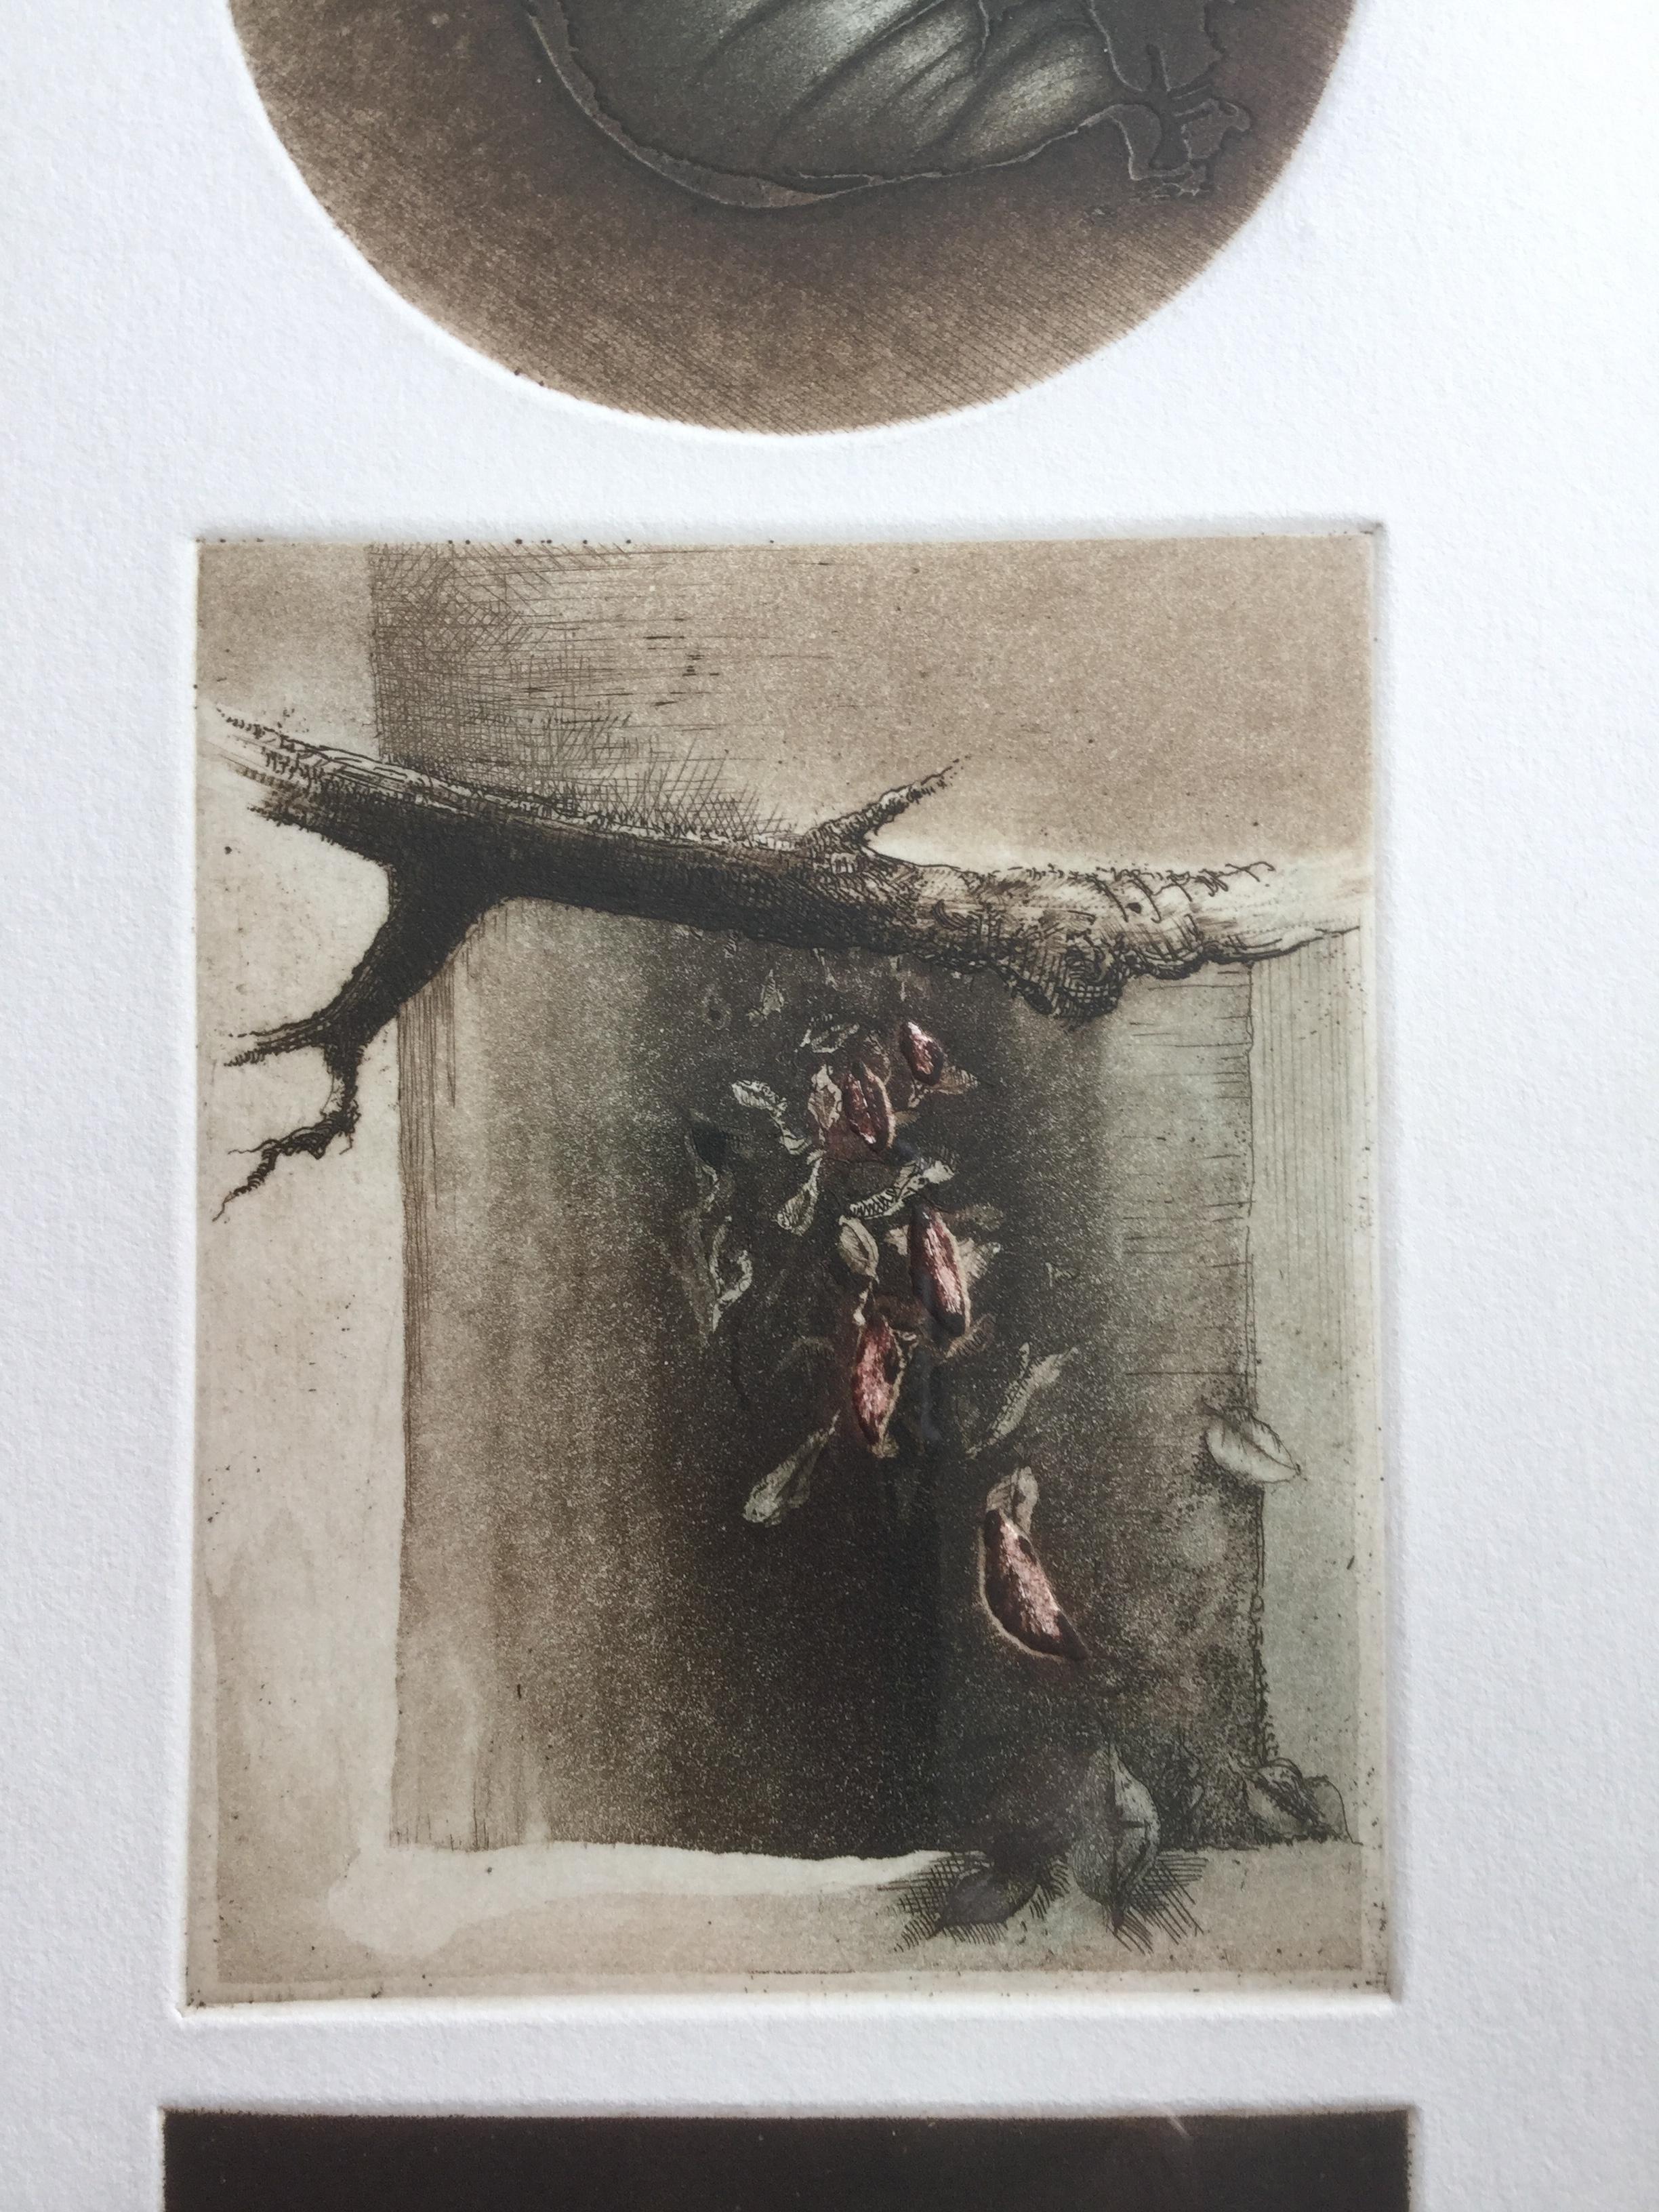 Leaves, Twigs and Trees Triptychon - Figuratives Mixed Med Print, kleine Auflage 2/X im Angebot 1